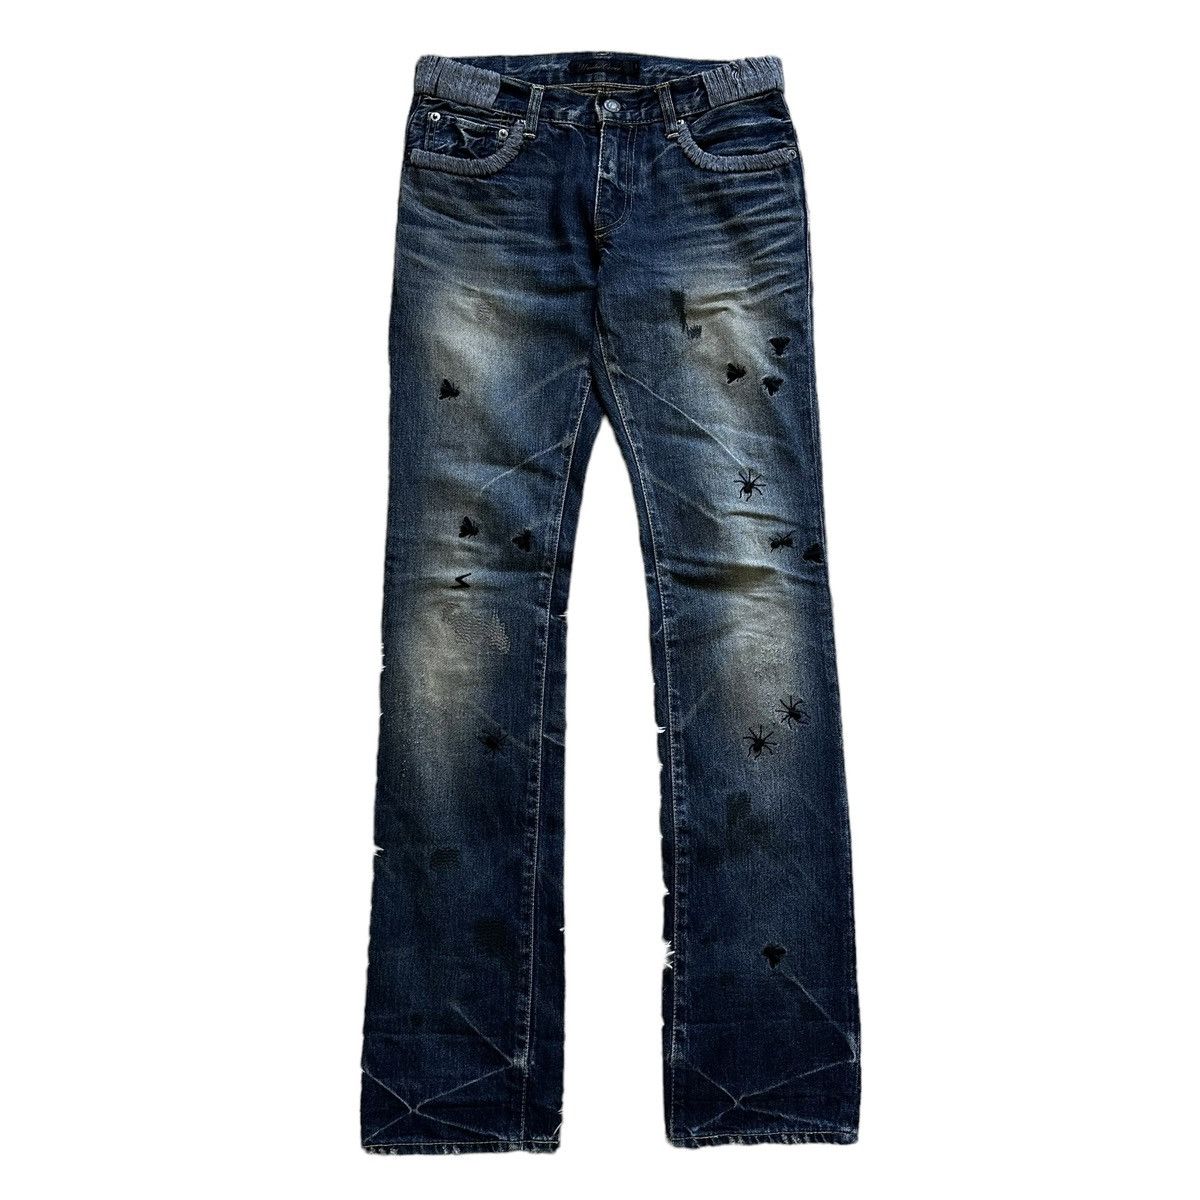 Undercover Undercover AW06 Bug/Insect Denim | Grailed